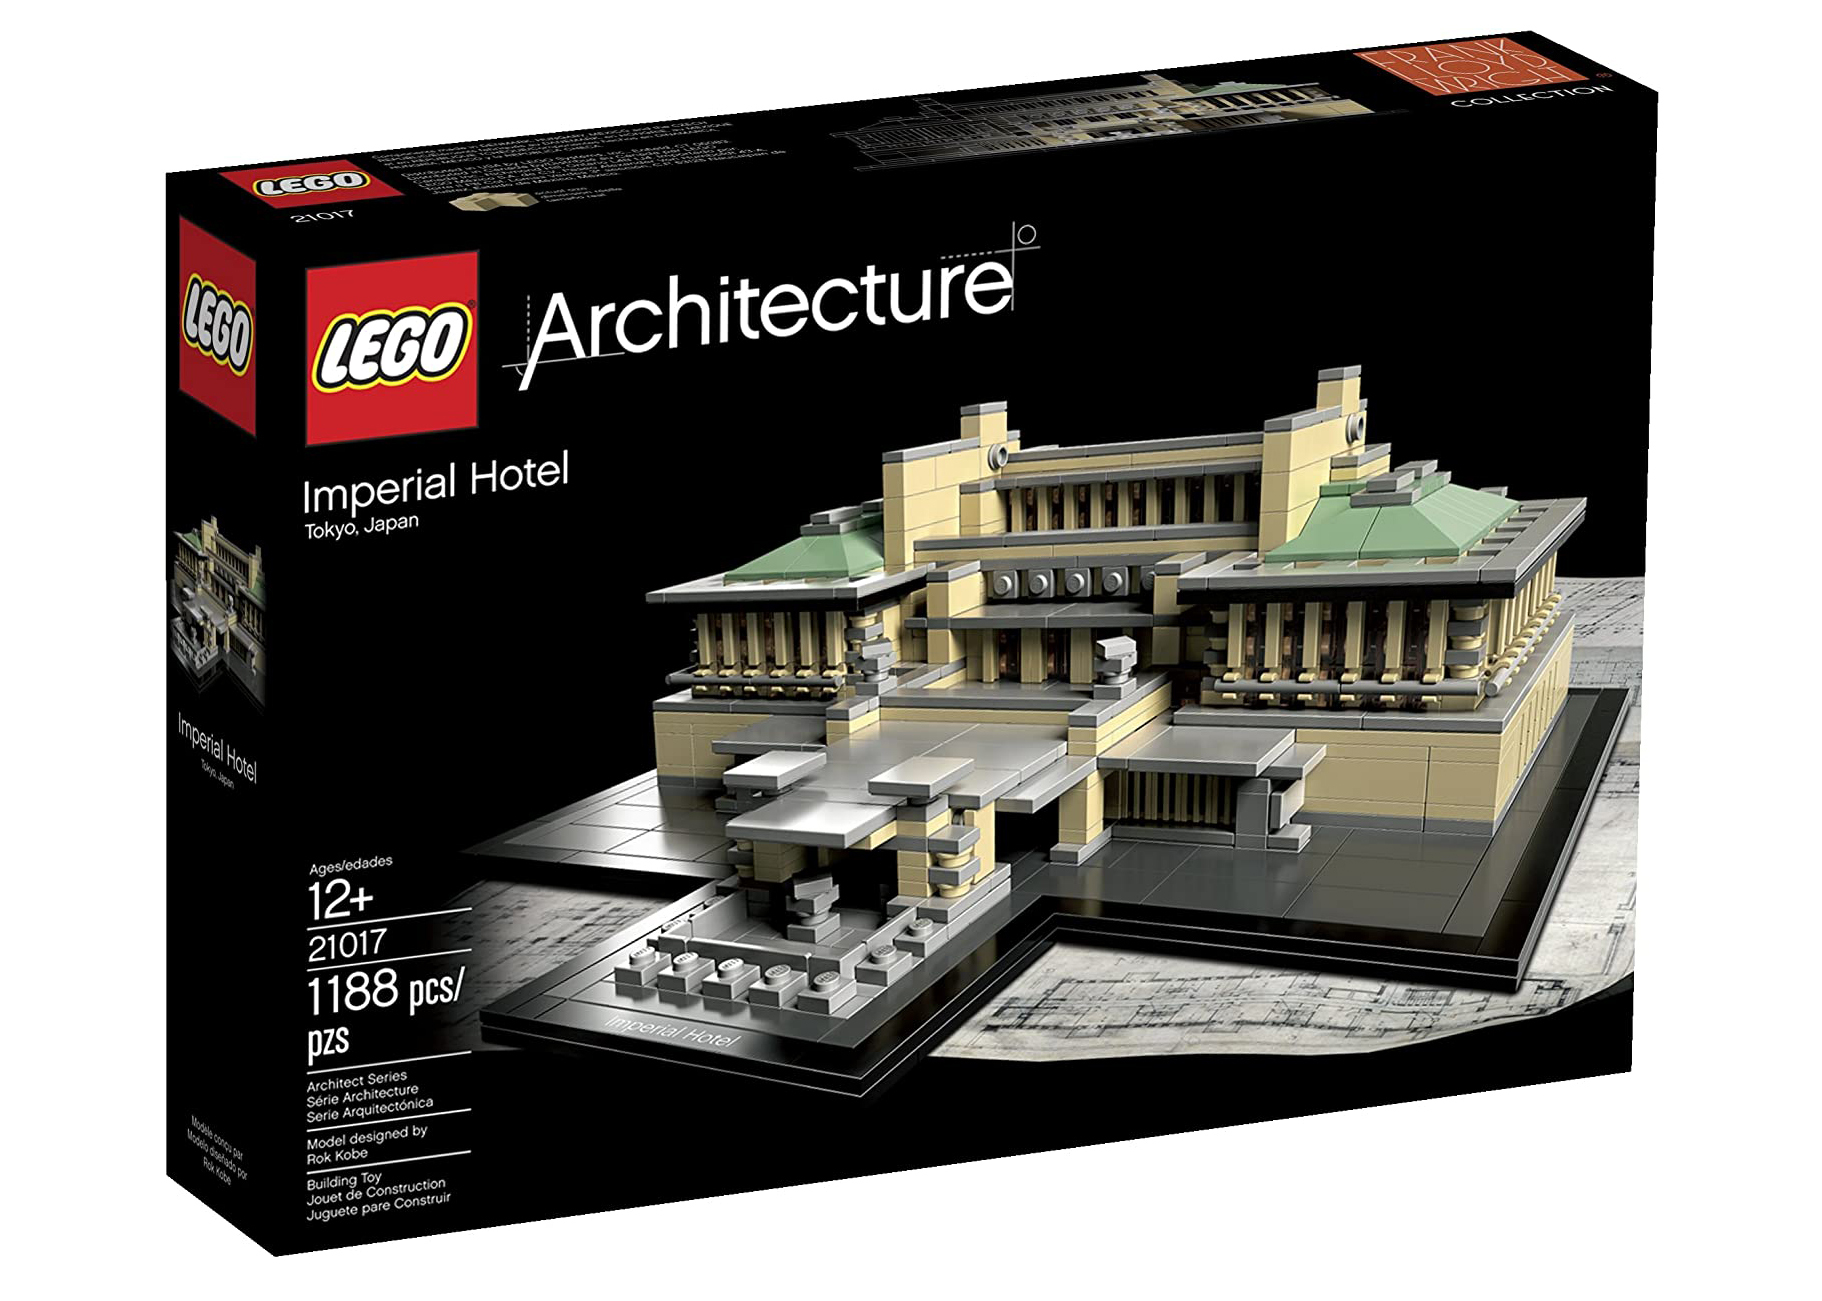 LEGO Architecture IMPERIAL HOTEL 21017 Toyko Japan — OPEN BOX 100% FULL NEW SET! 